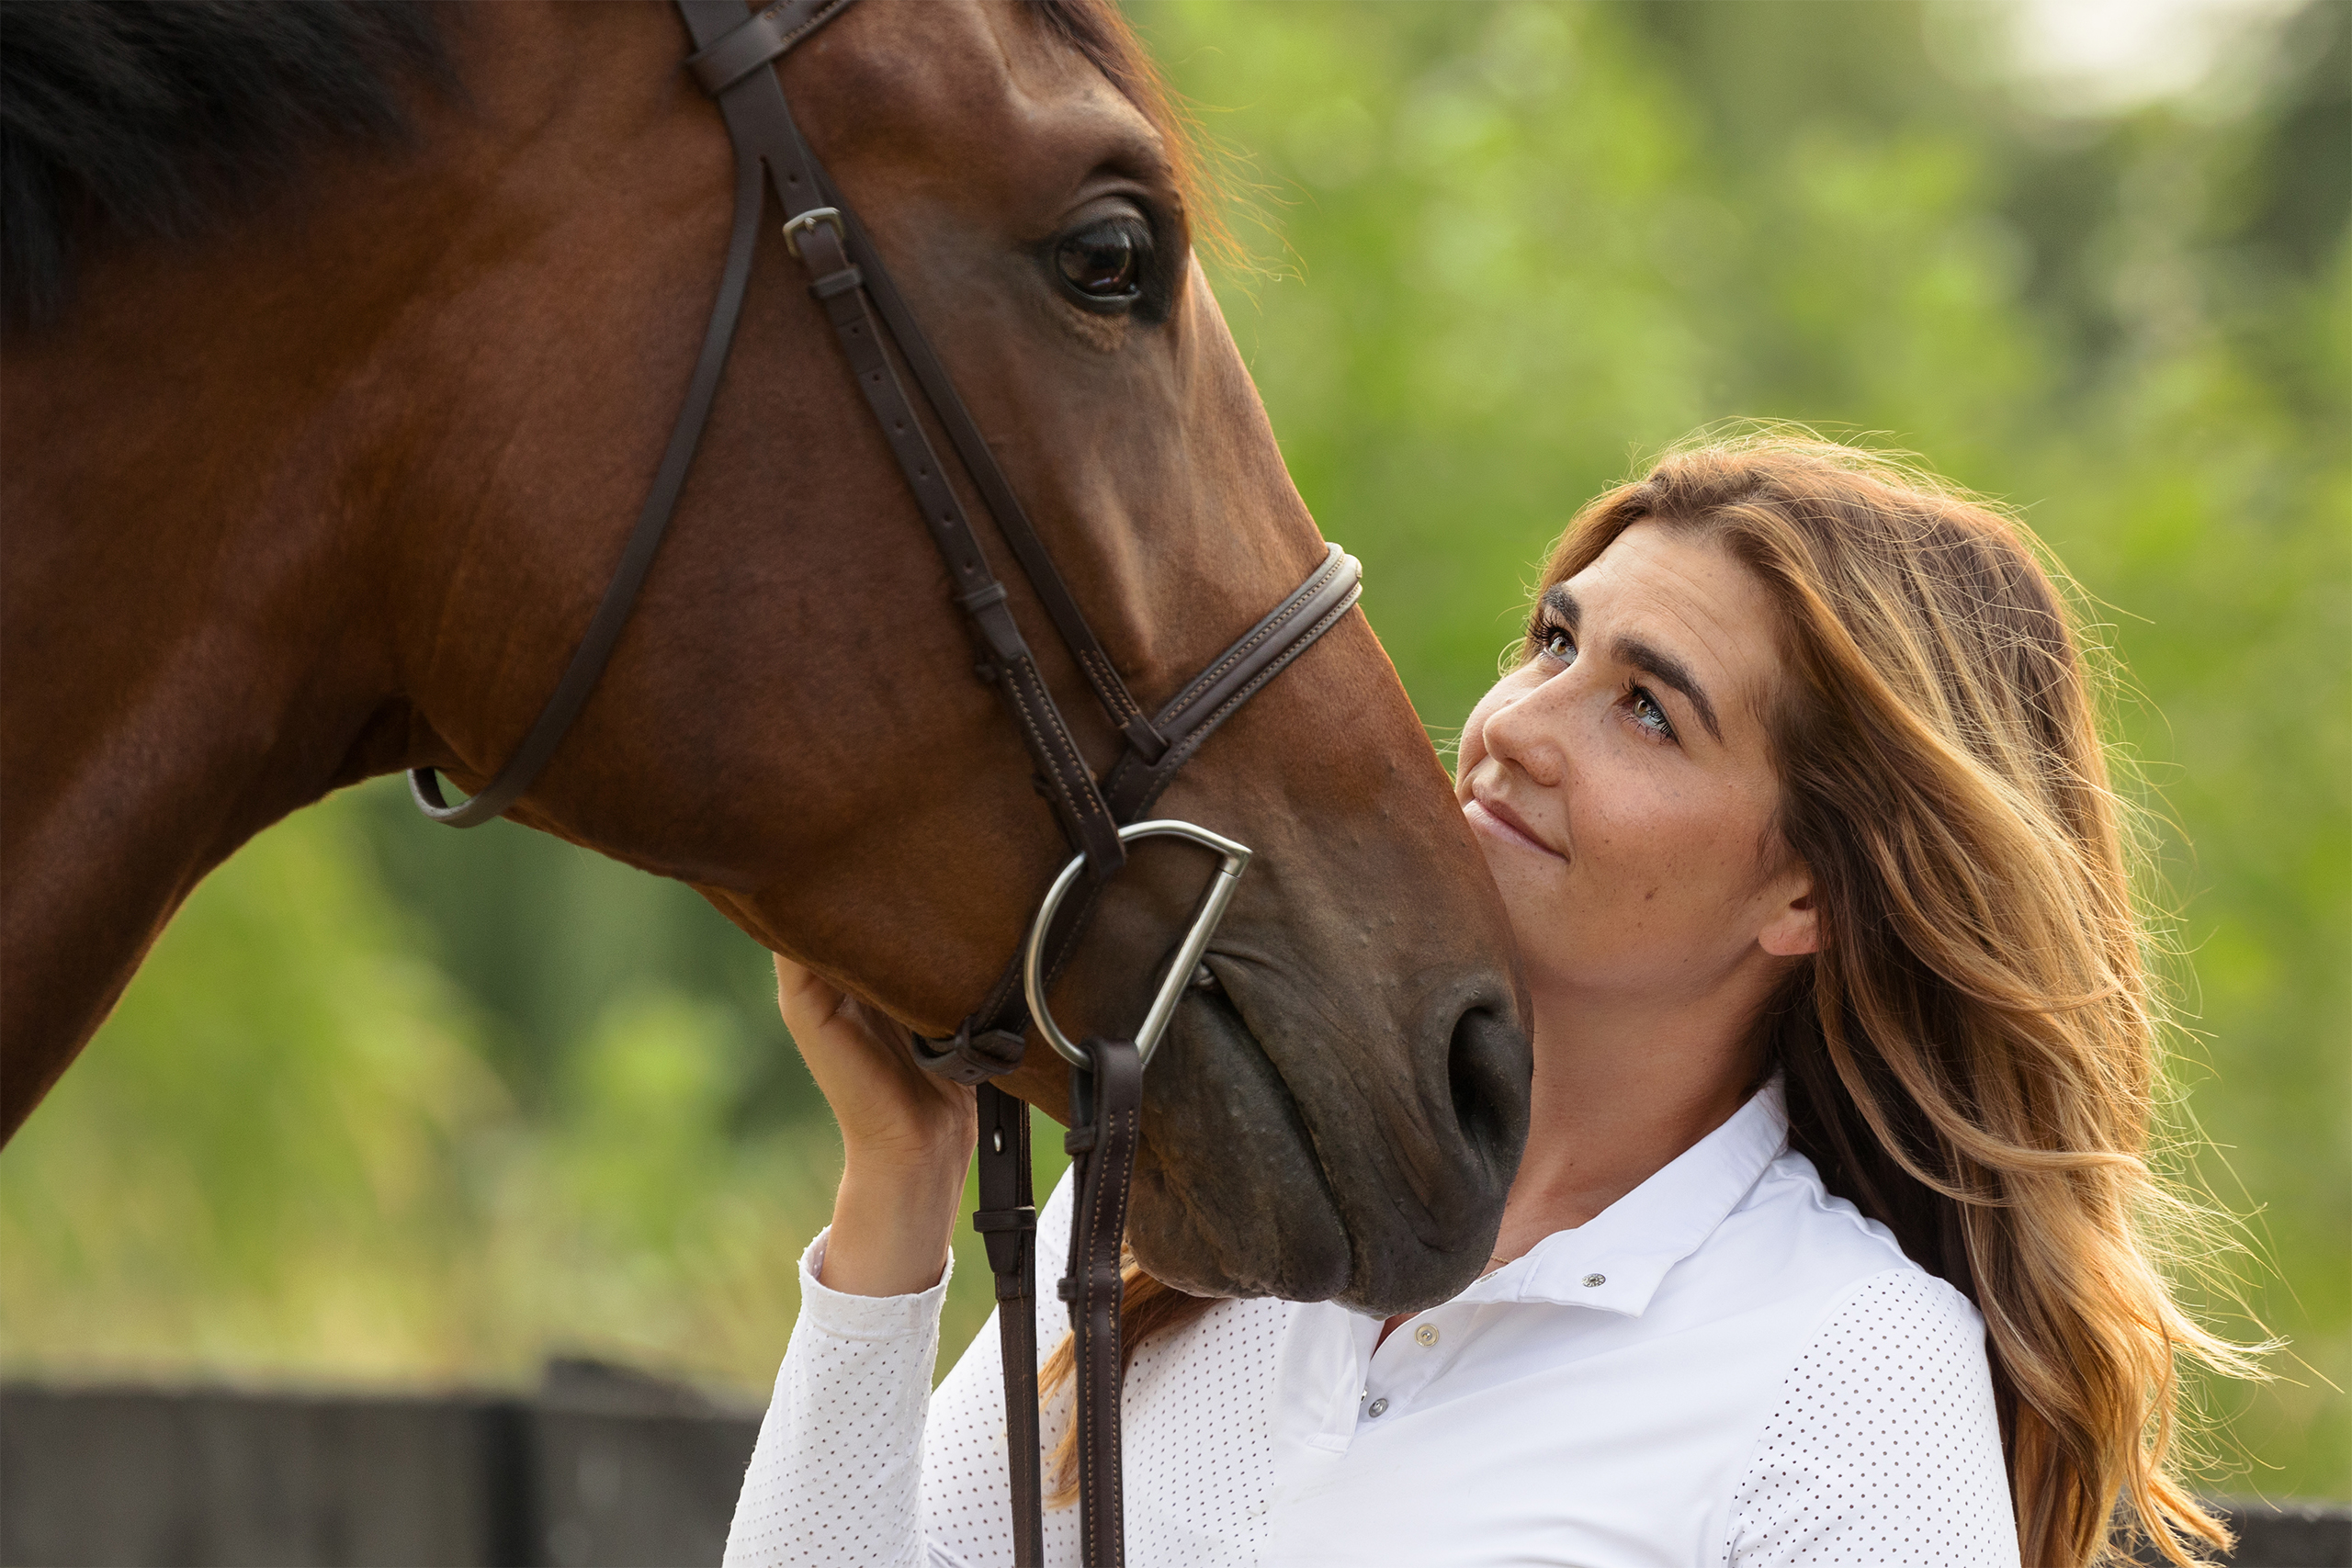 woman gazing lovingly into the eyes of her horse